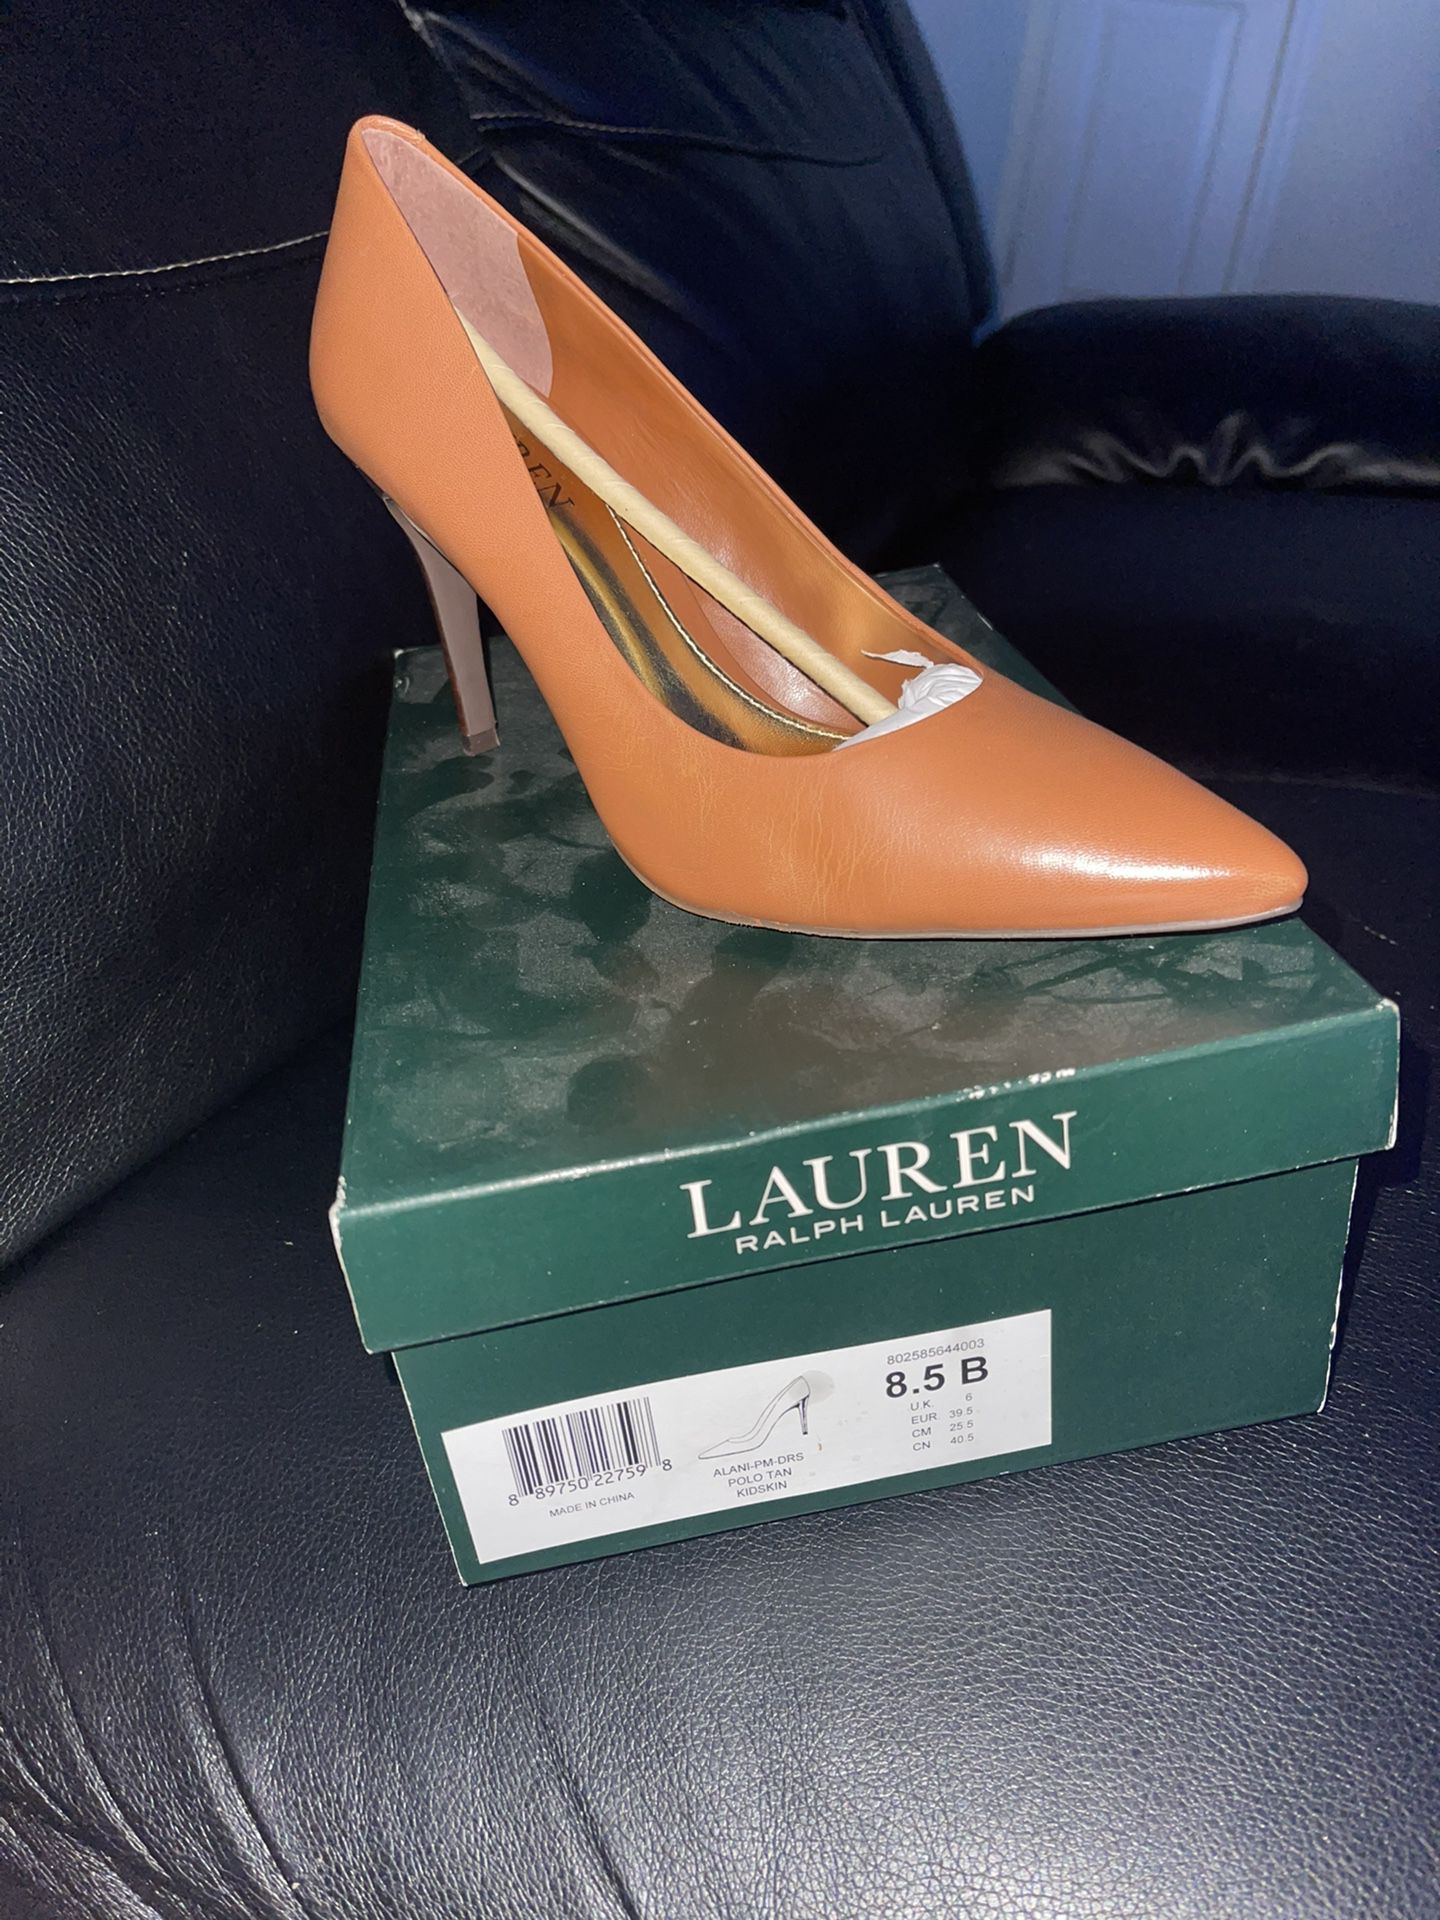 Alani-PM-DRS Ralph Lauren for Sale in Greensboro, NC - OfferUp